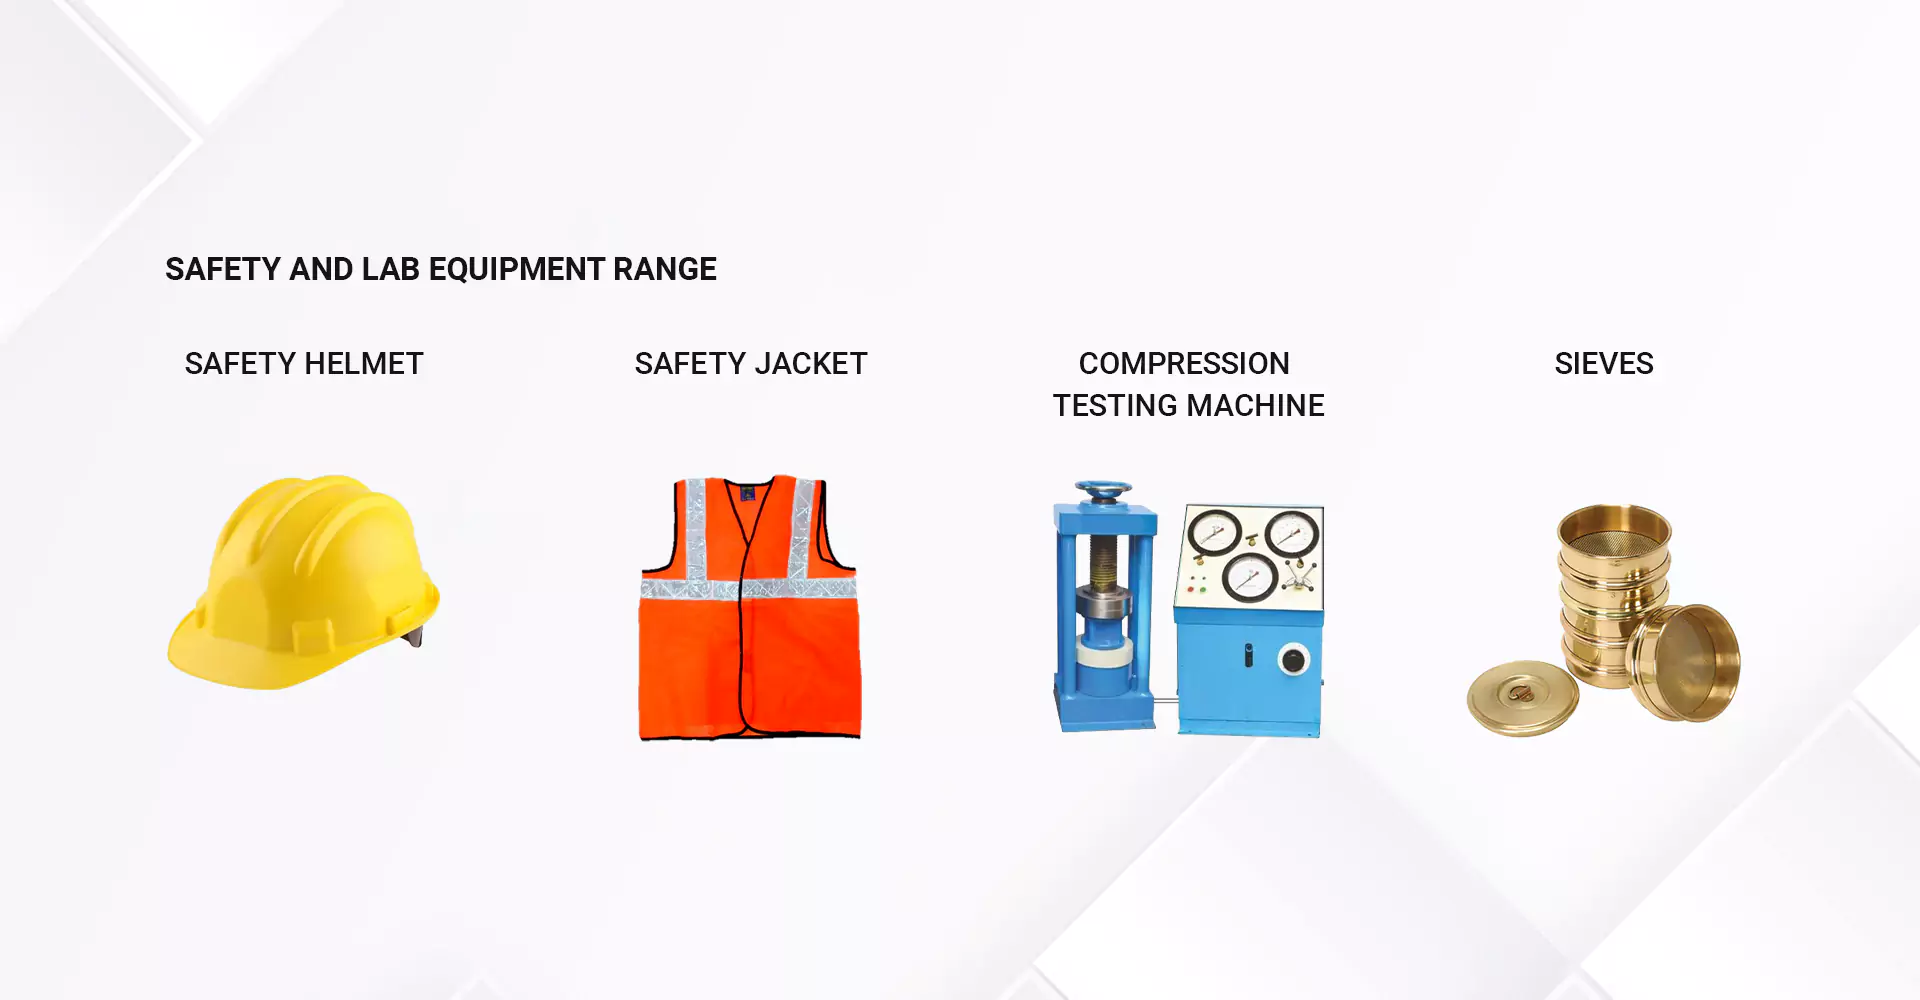 SAFETY AND LAB EQUIPMENT RANGE